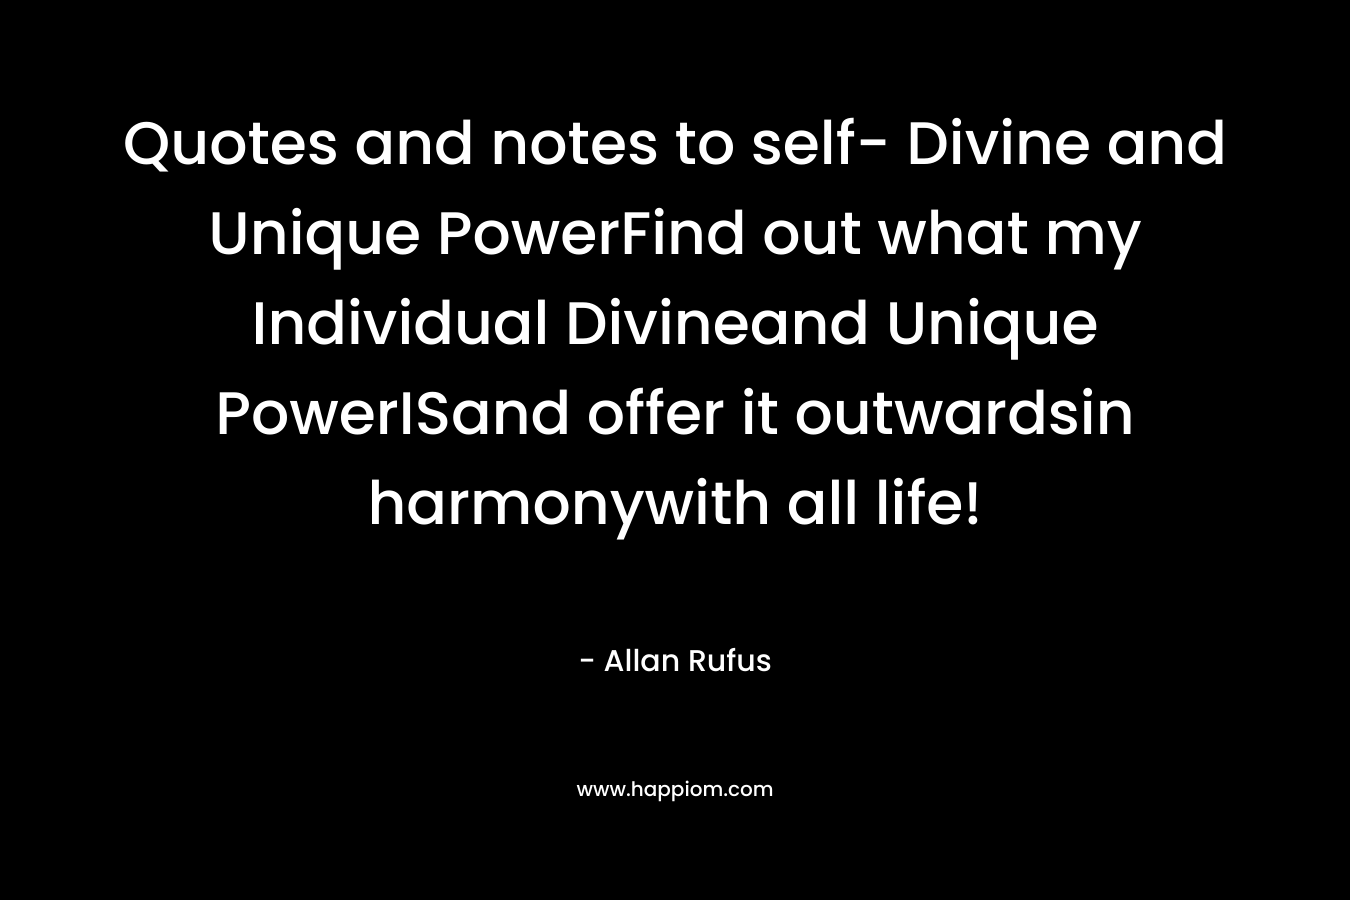 Quotes and notes to self- Divine and Unique PowerFind out what my Individual Divineand Unique PowerISand offer it outwardsin harmonywith all life! – Allan Rufus